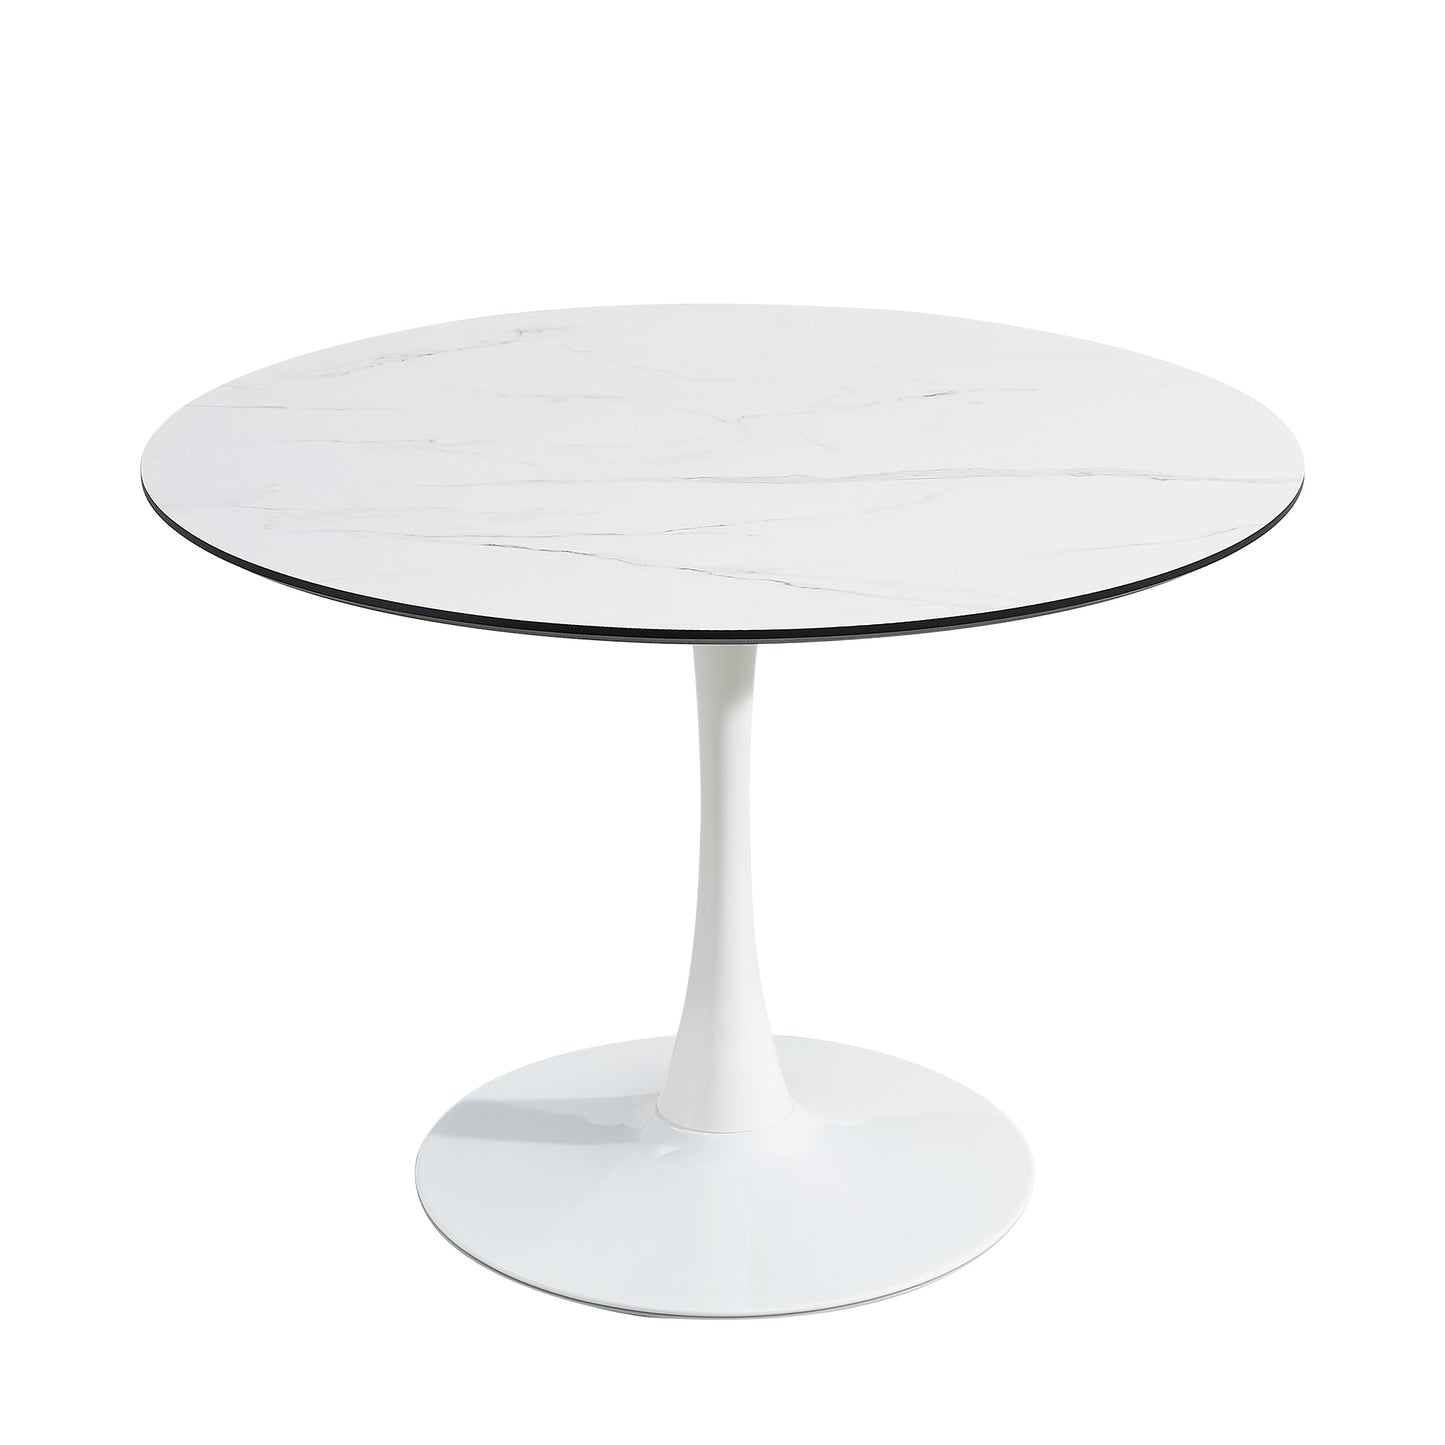 TULIP DINING TABLE ,32IN ROUND, WHITE, Mable black, 1pc per ctn